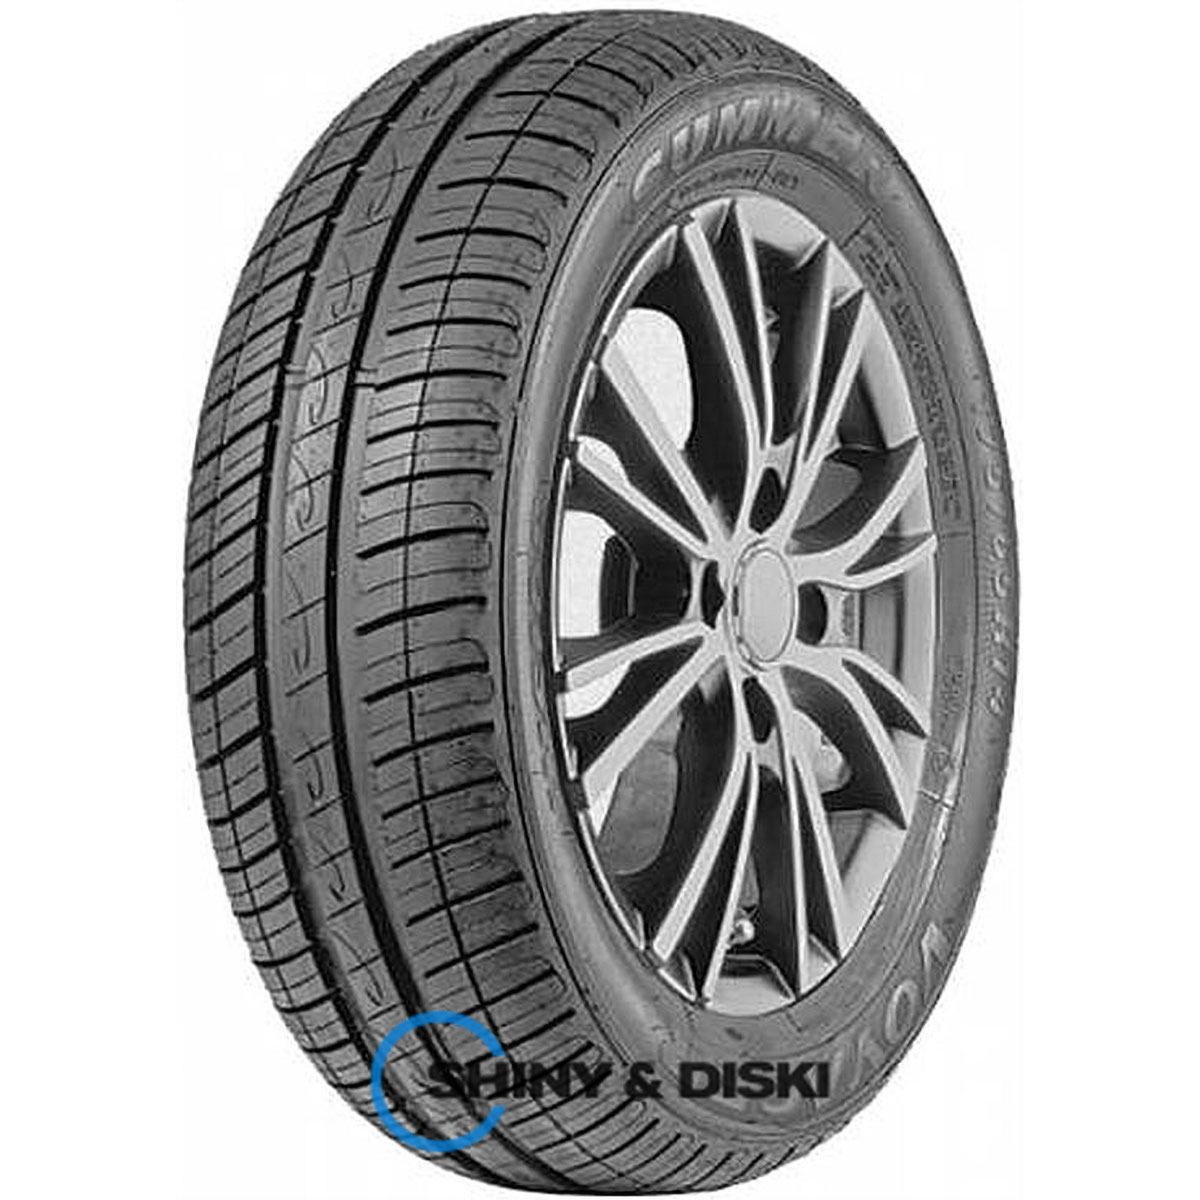 voyager summer st 175/65 r14 82t